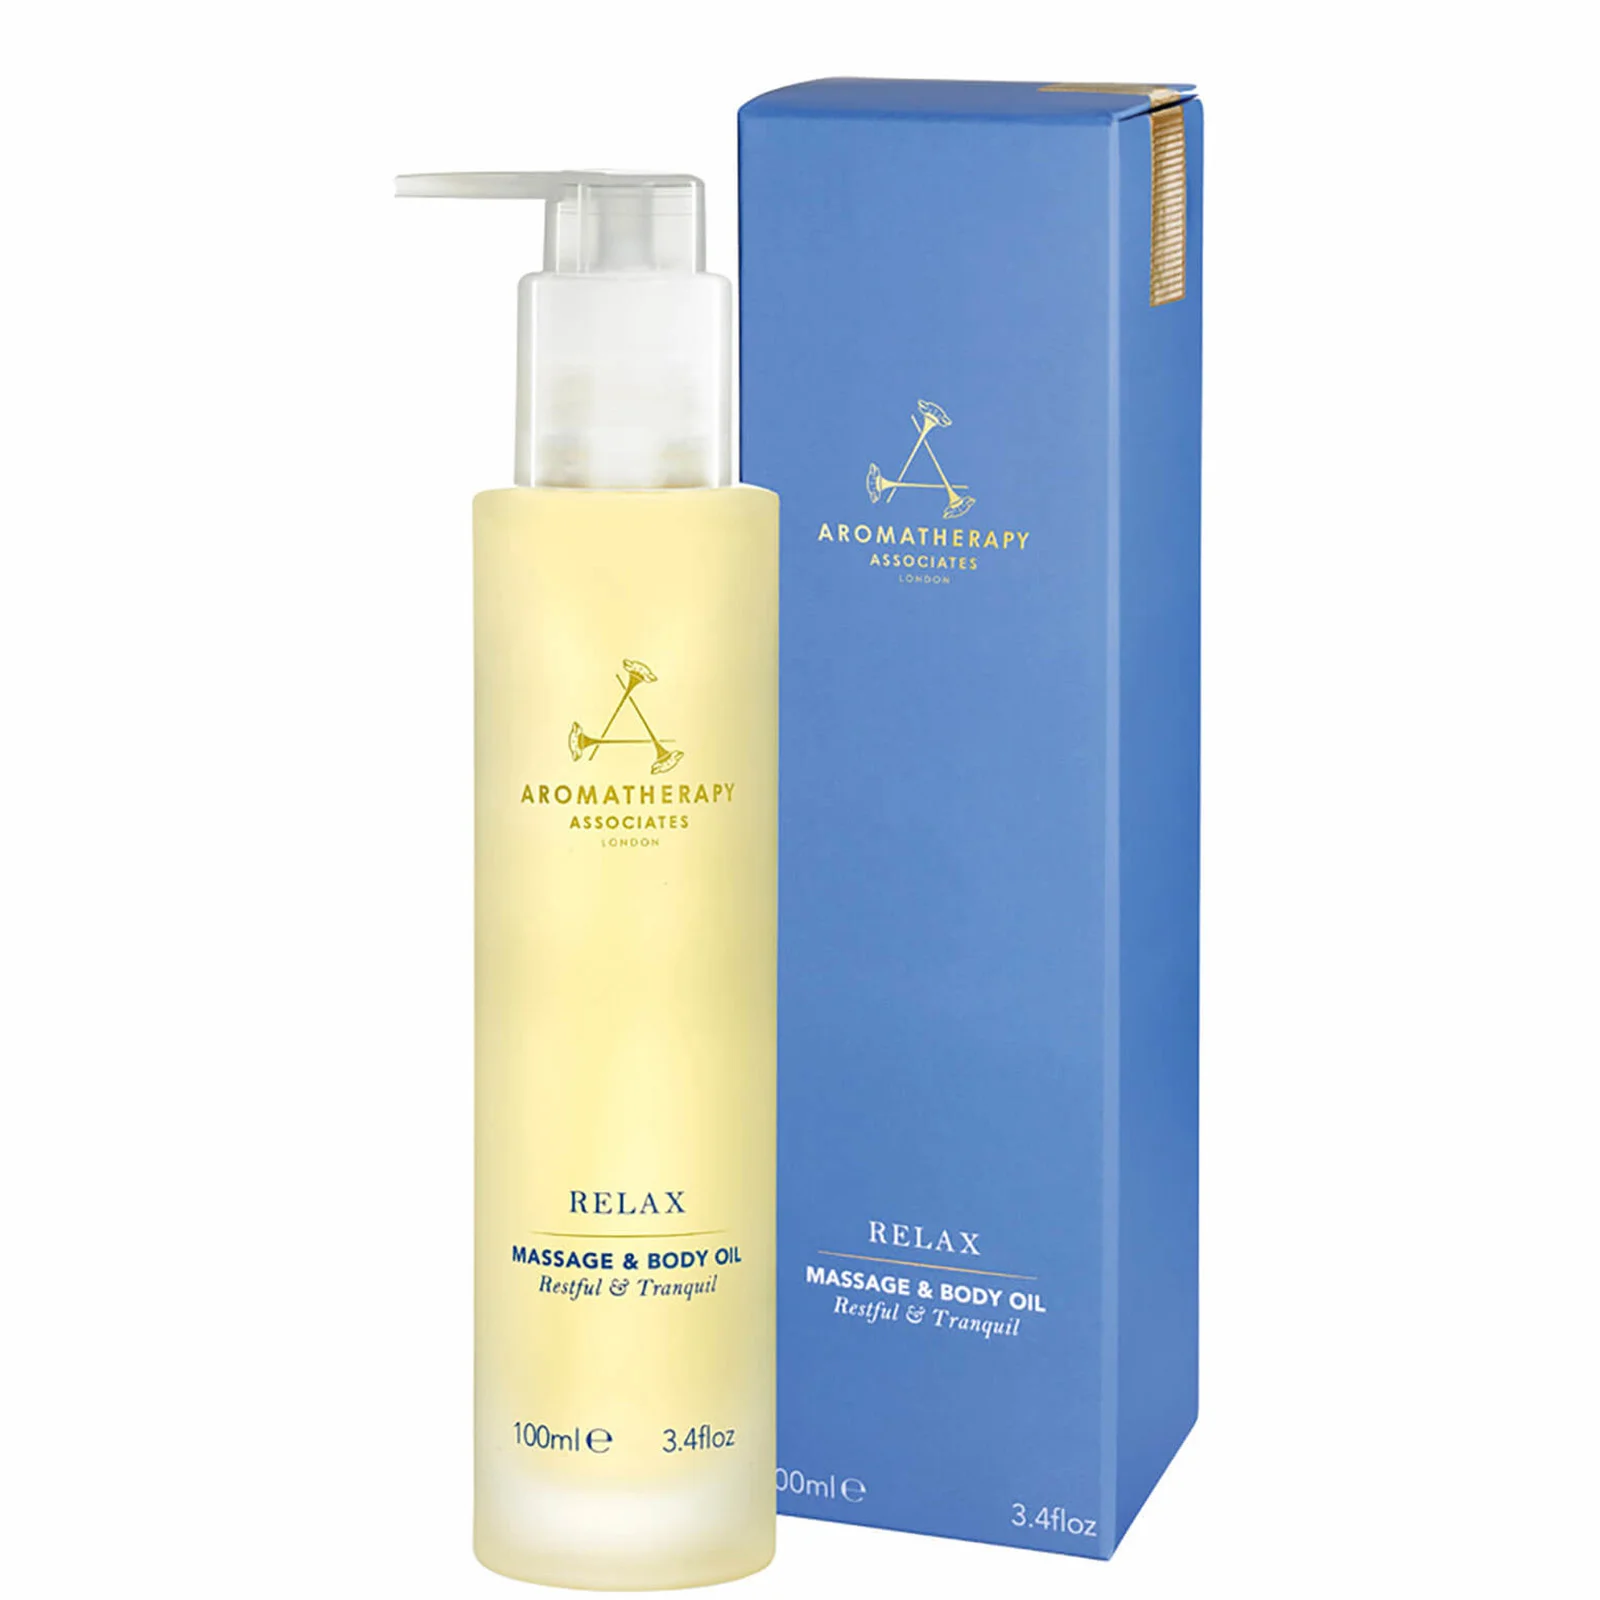 Aromatherapy Associates Relax Body and Massage Oil Image 1